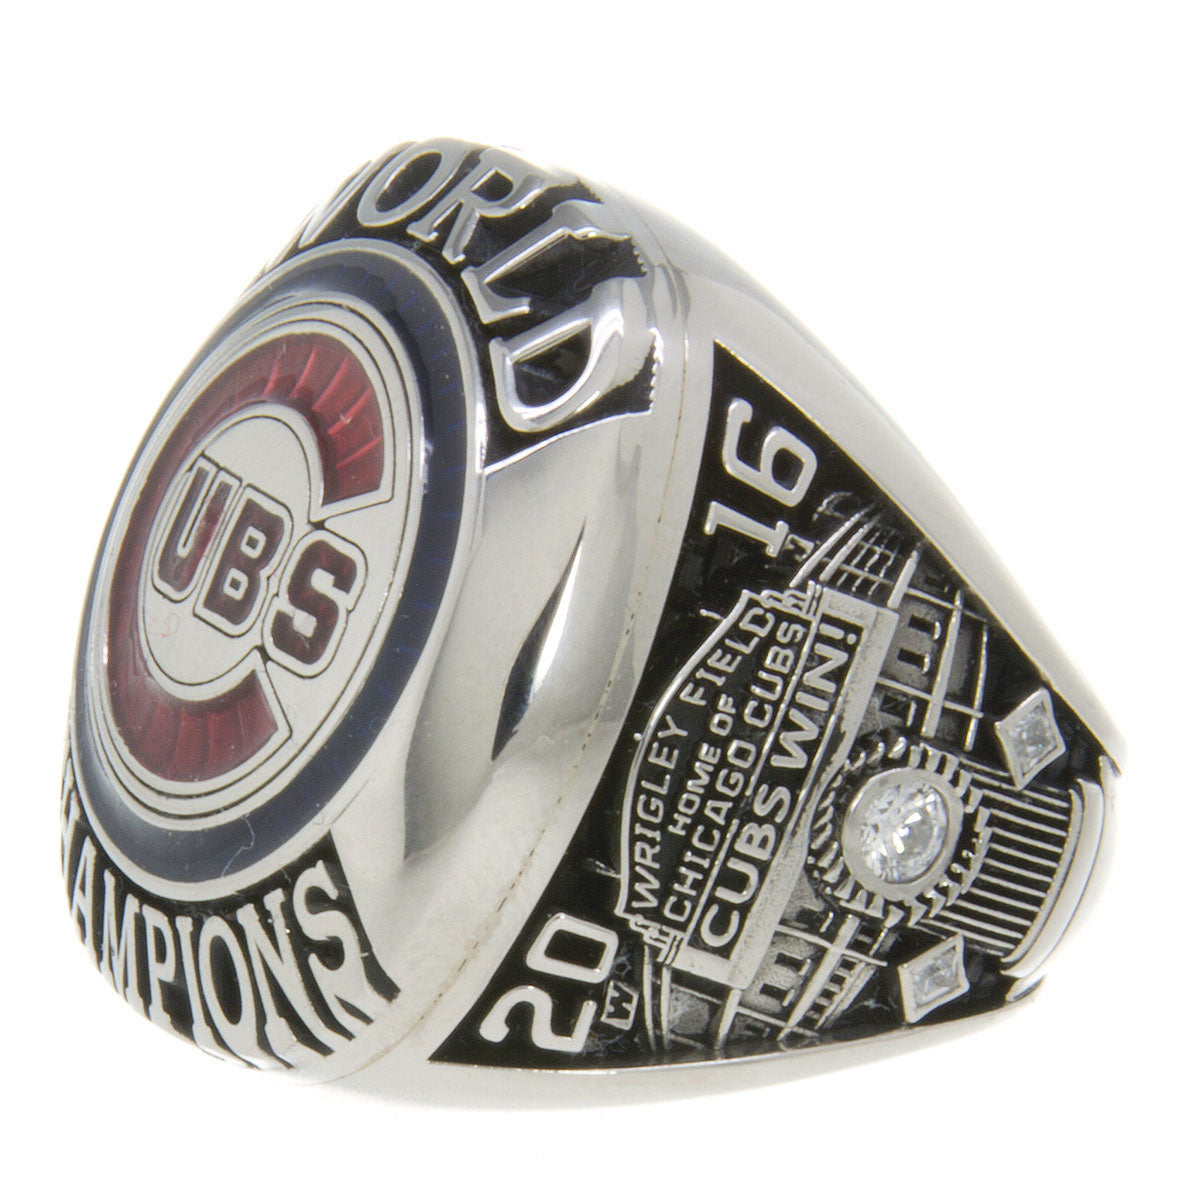 Cubs Put a Pricetag on the 2016 World Series Ring